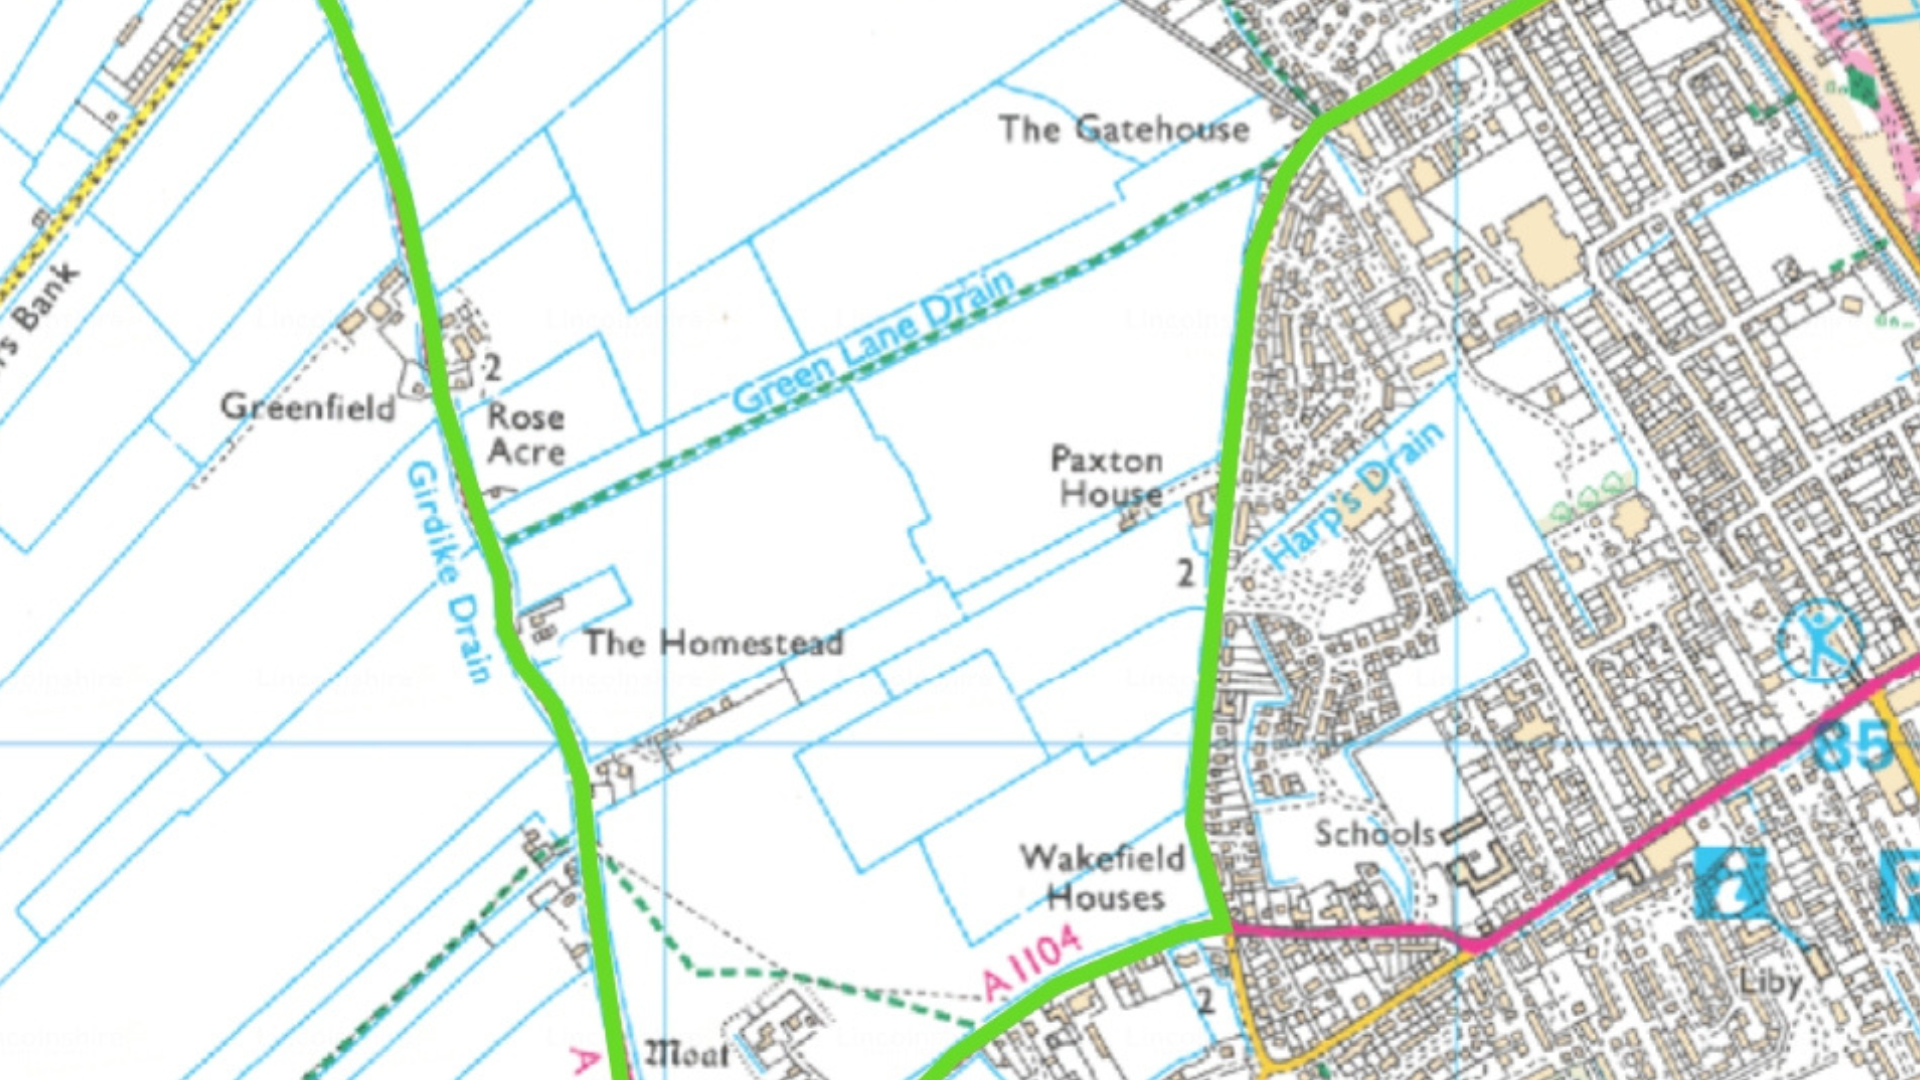 Footpath rebuild for Mablethorpe diversion route